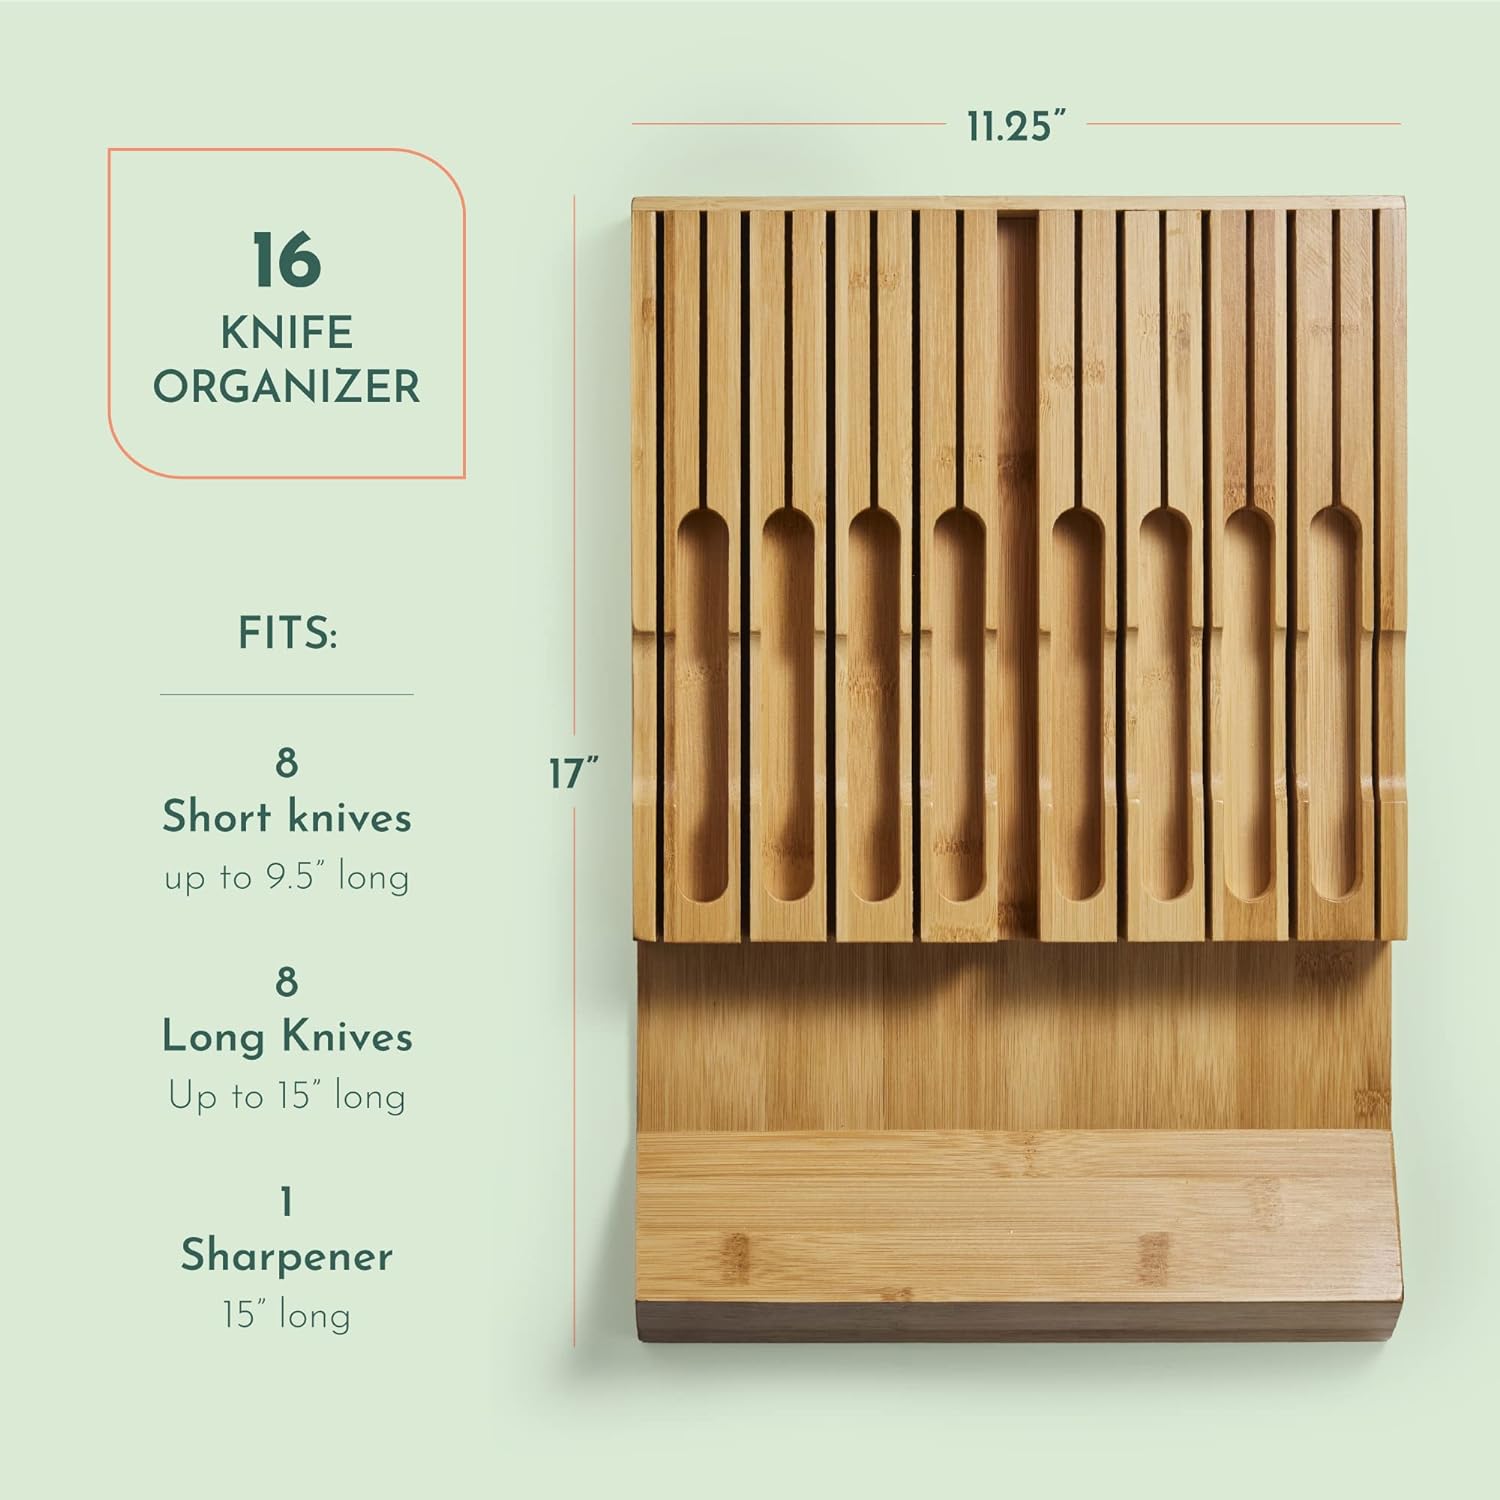 High-Grade 100% Bamboo Knife Drawer Organizer with 16 Knife Slots Plus a Sharpener Slot